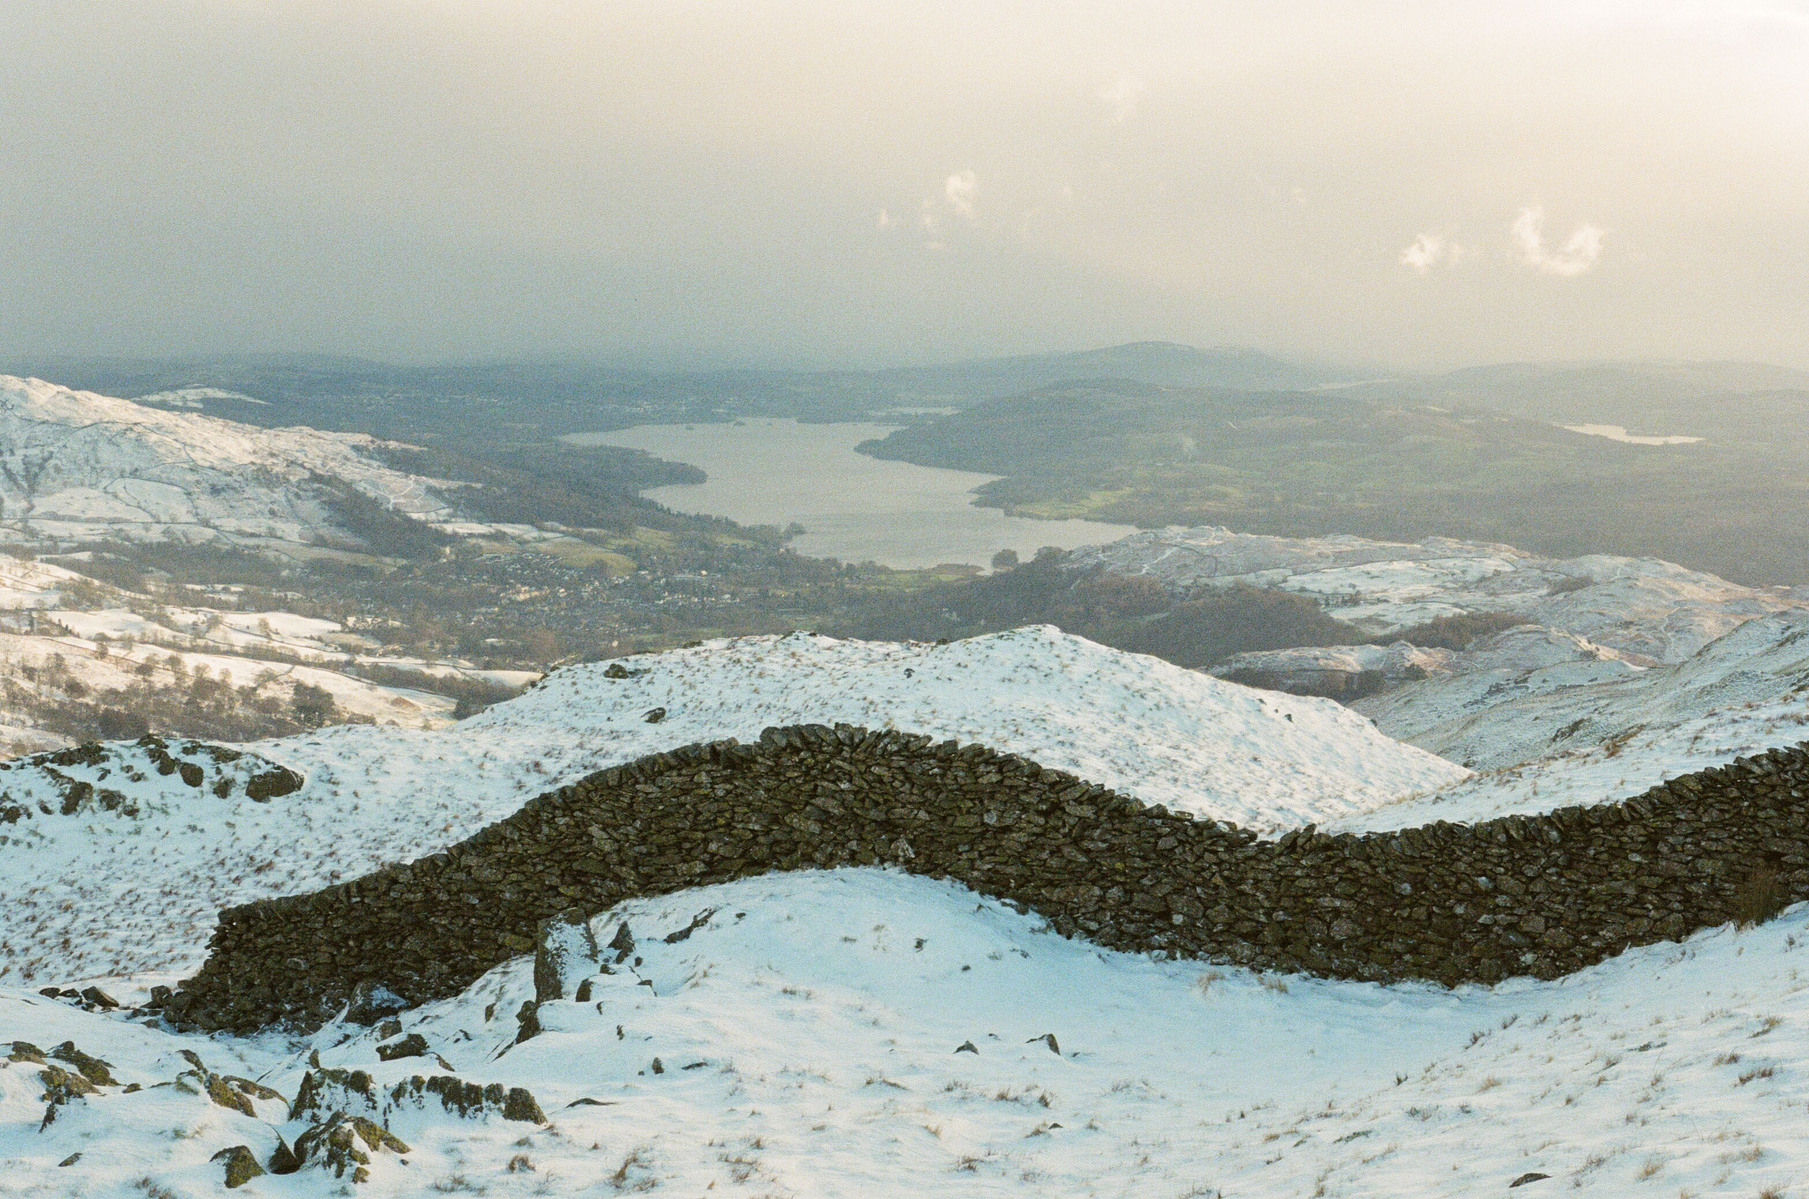 A dry stone wall snakes over a snowy fell overlooking Windermere in the Lake District